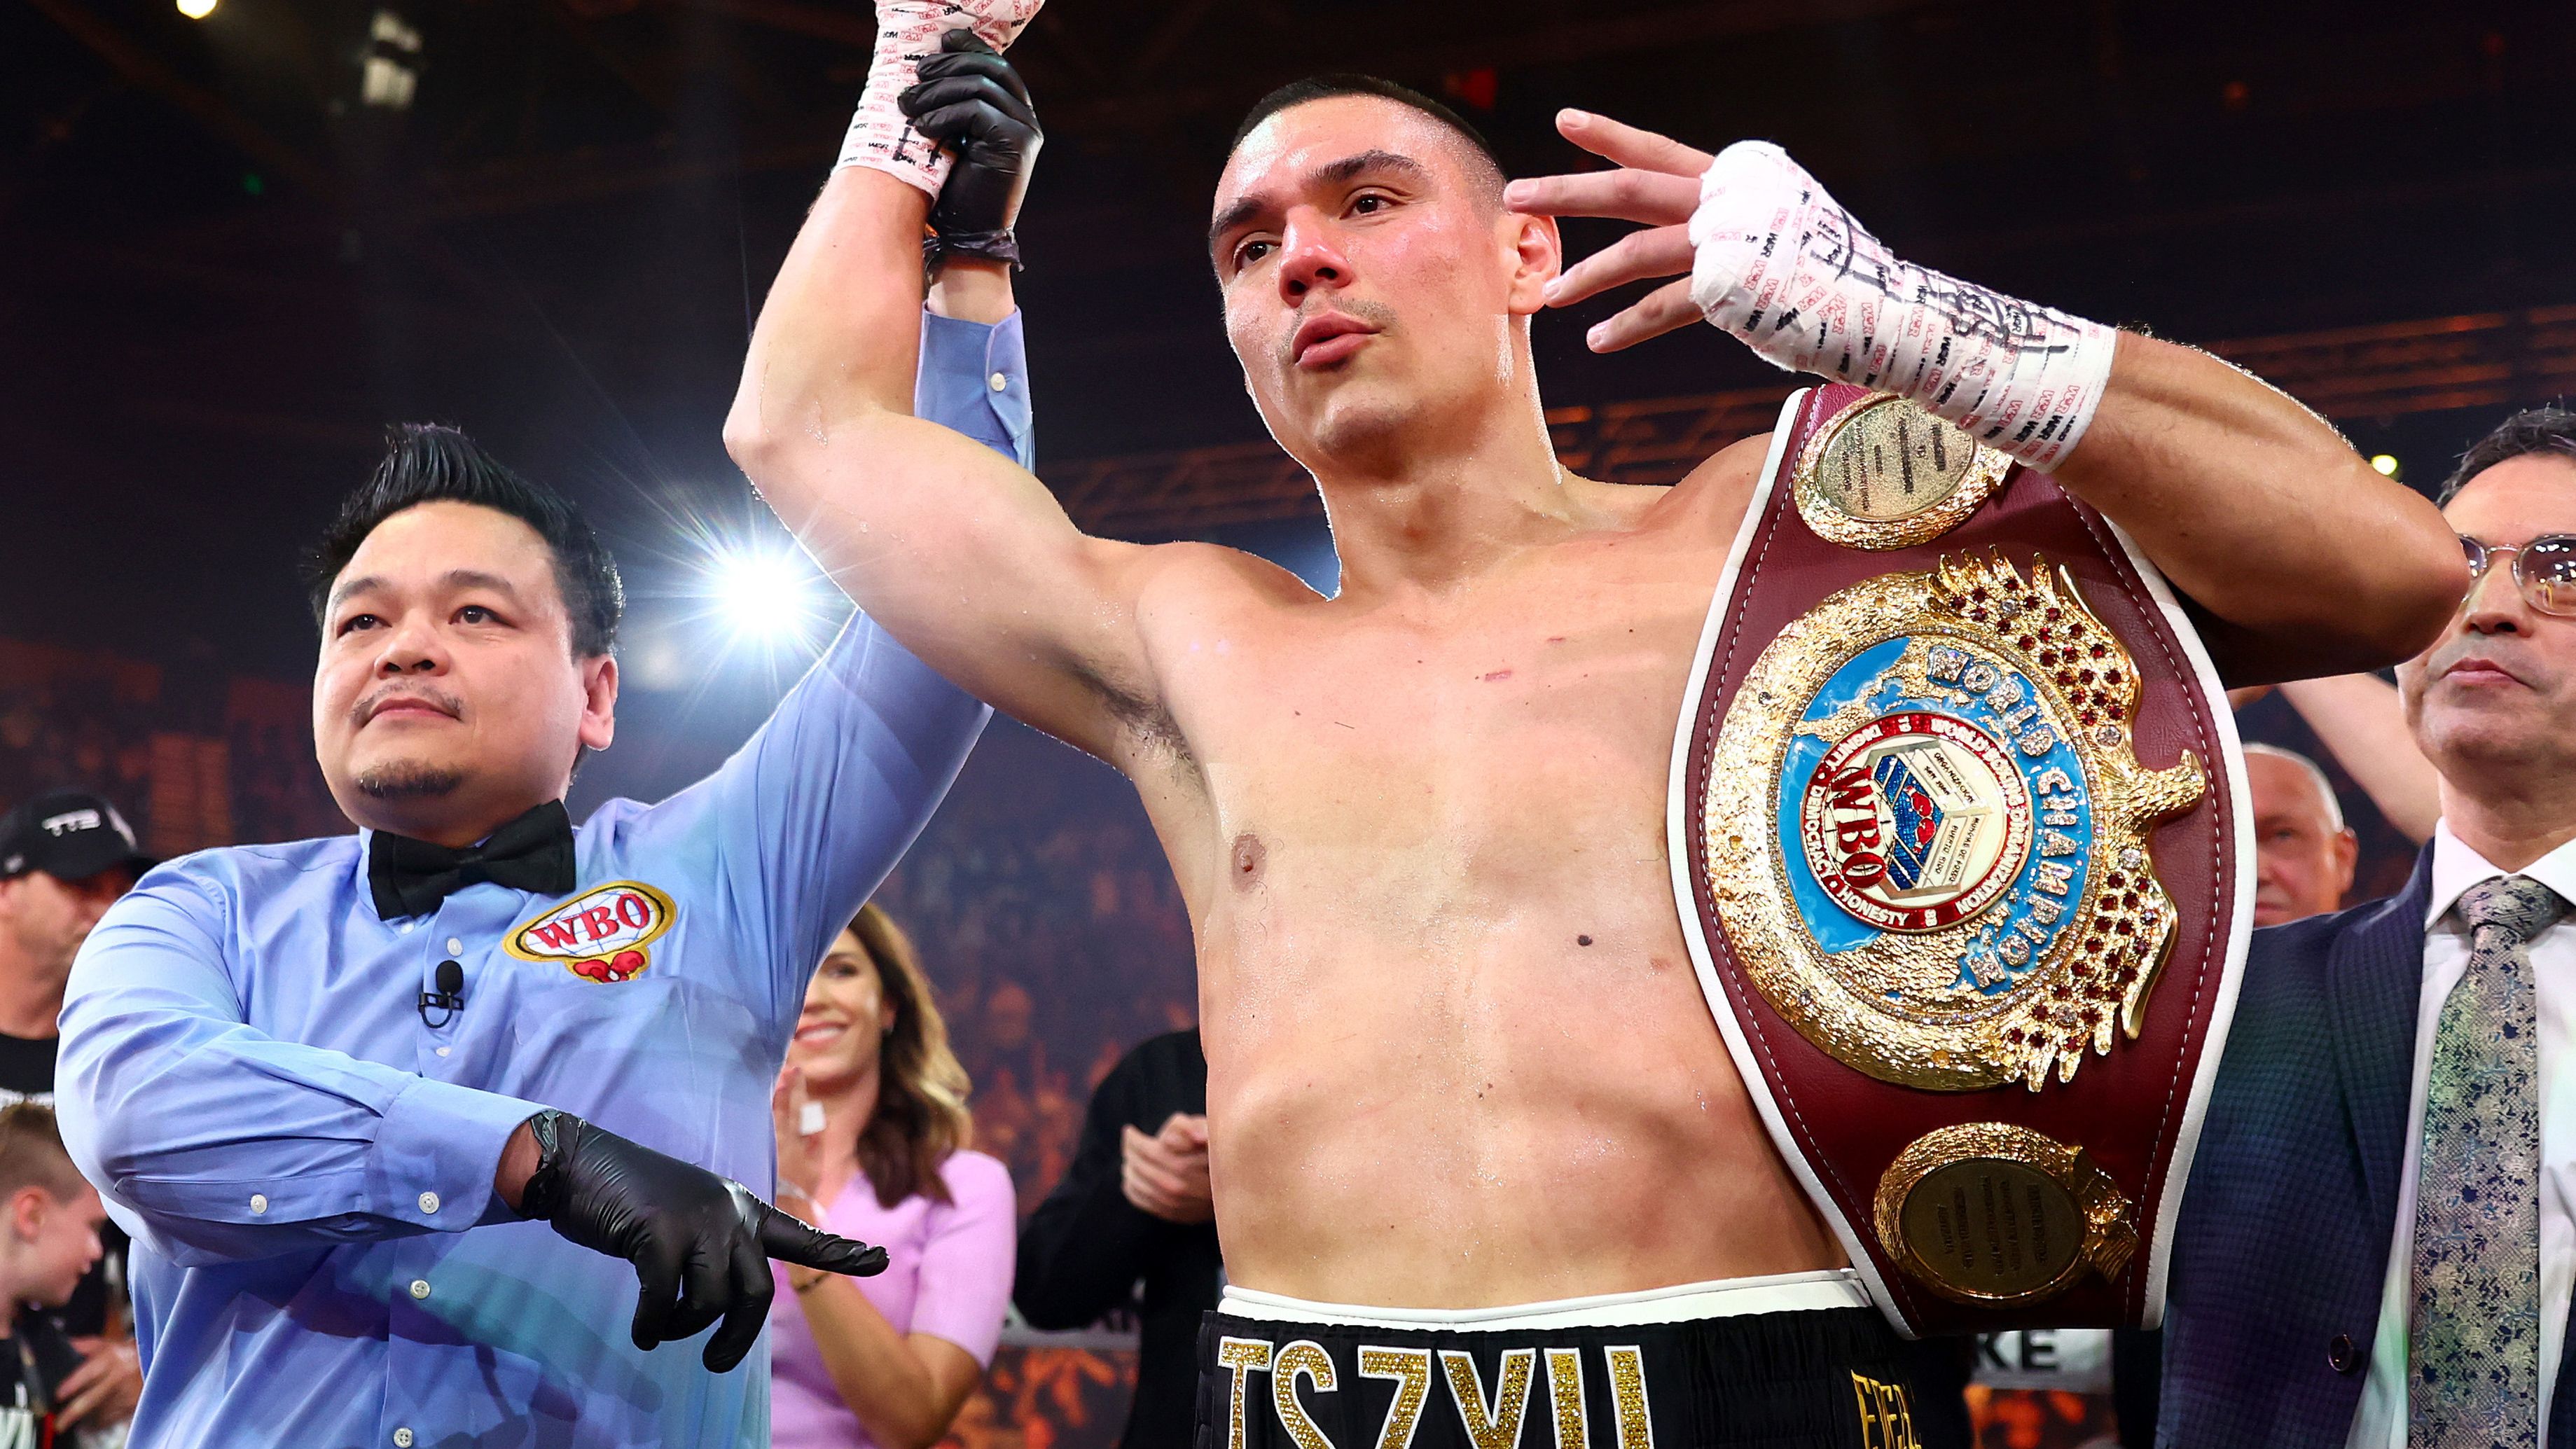 Twist with two world titles now on the line after Tim Tszyu's opponent pulls out of Vegas fight